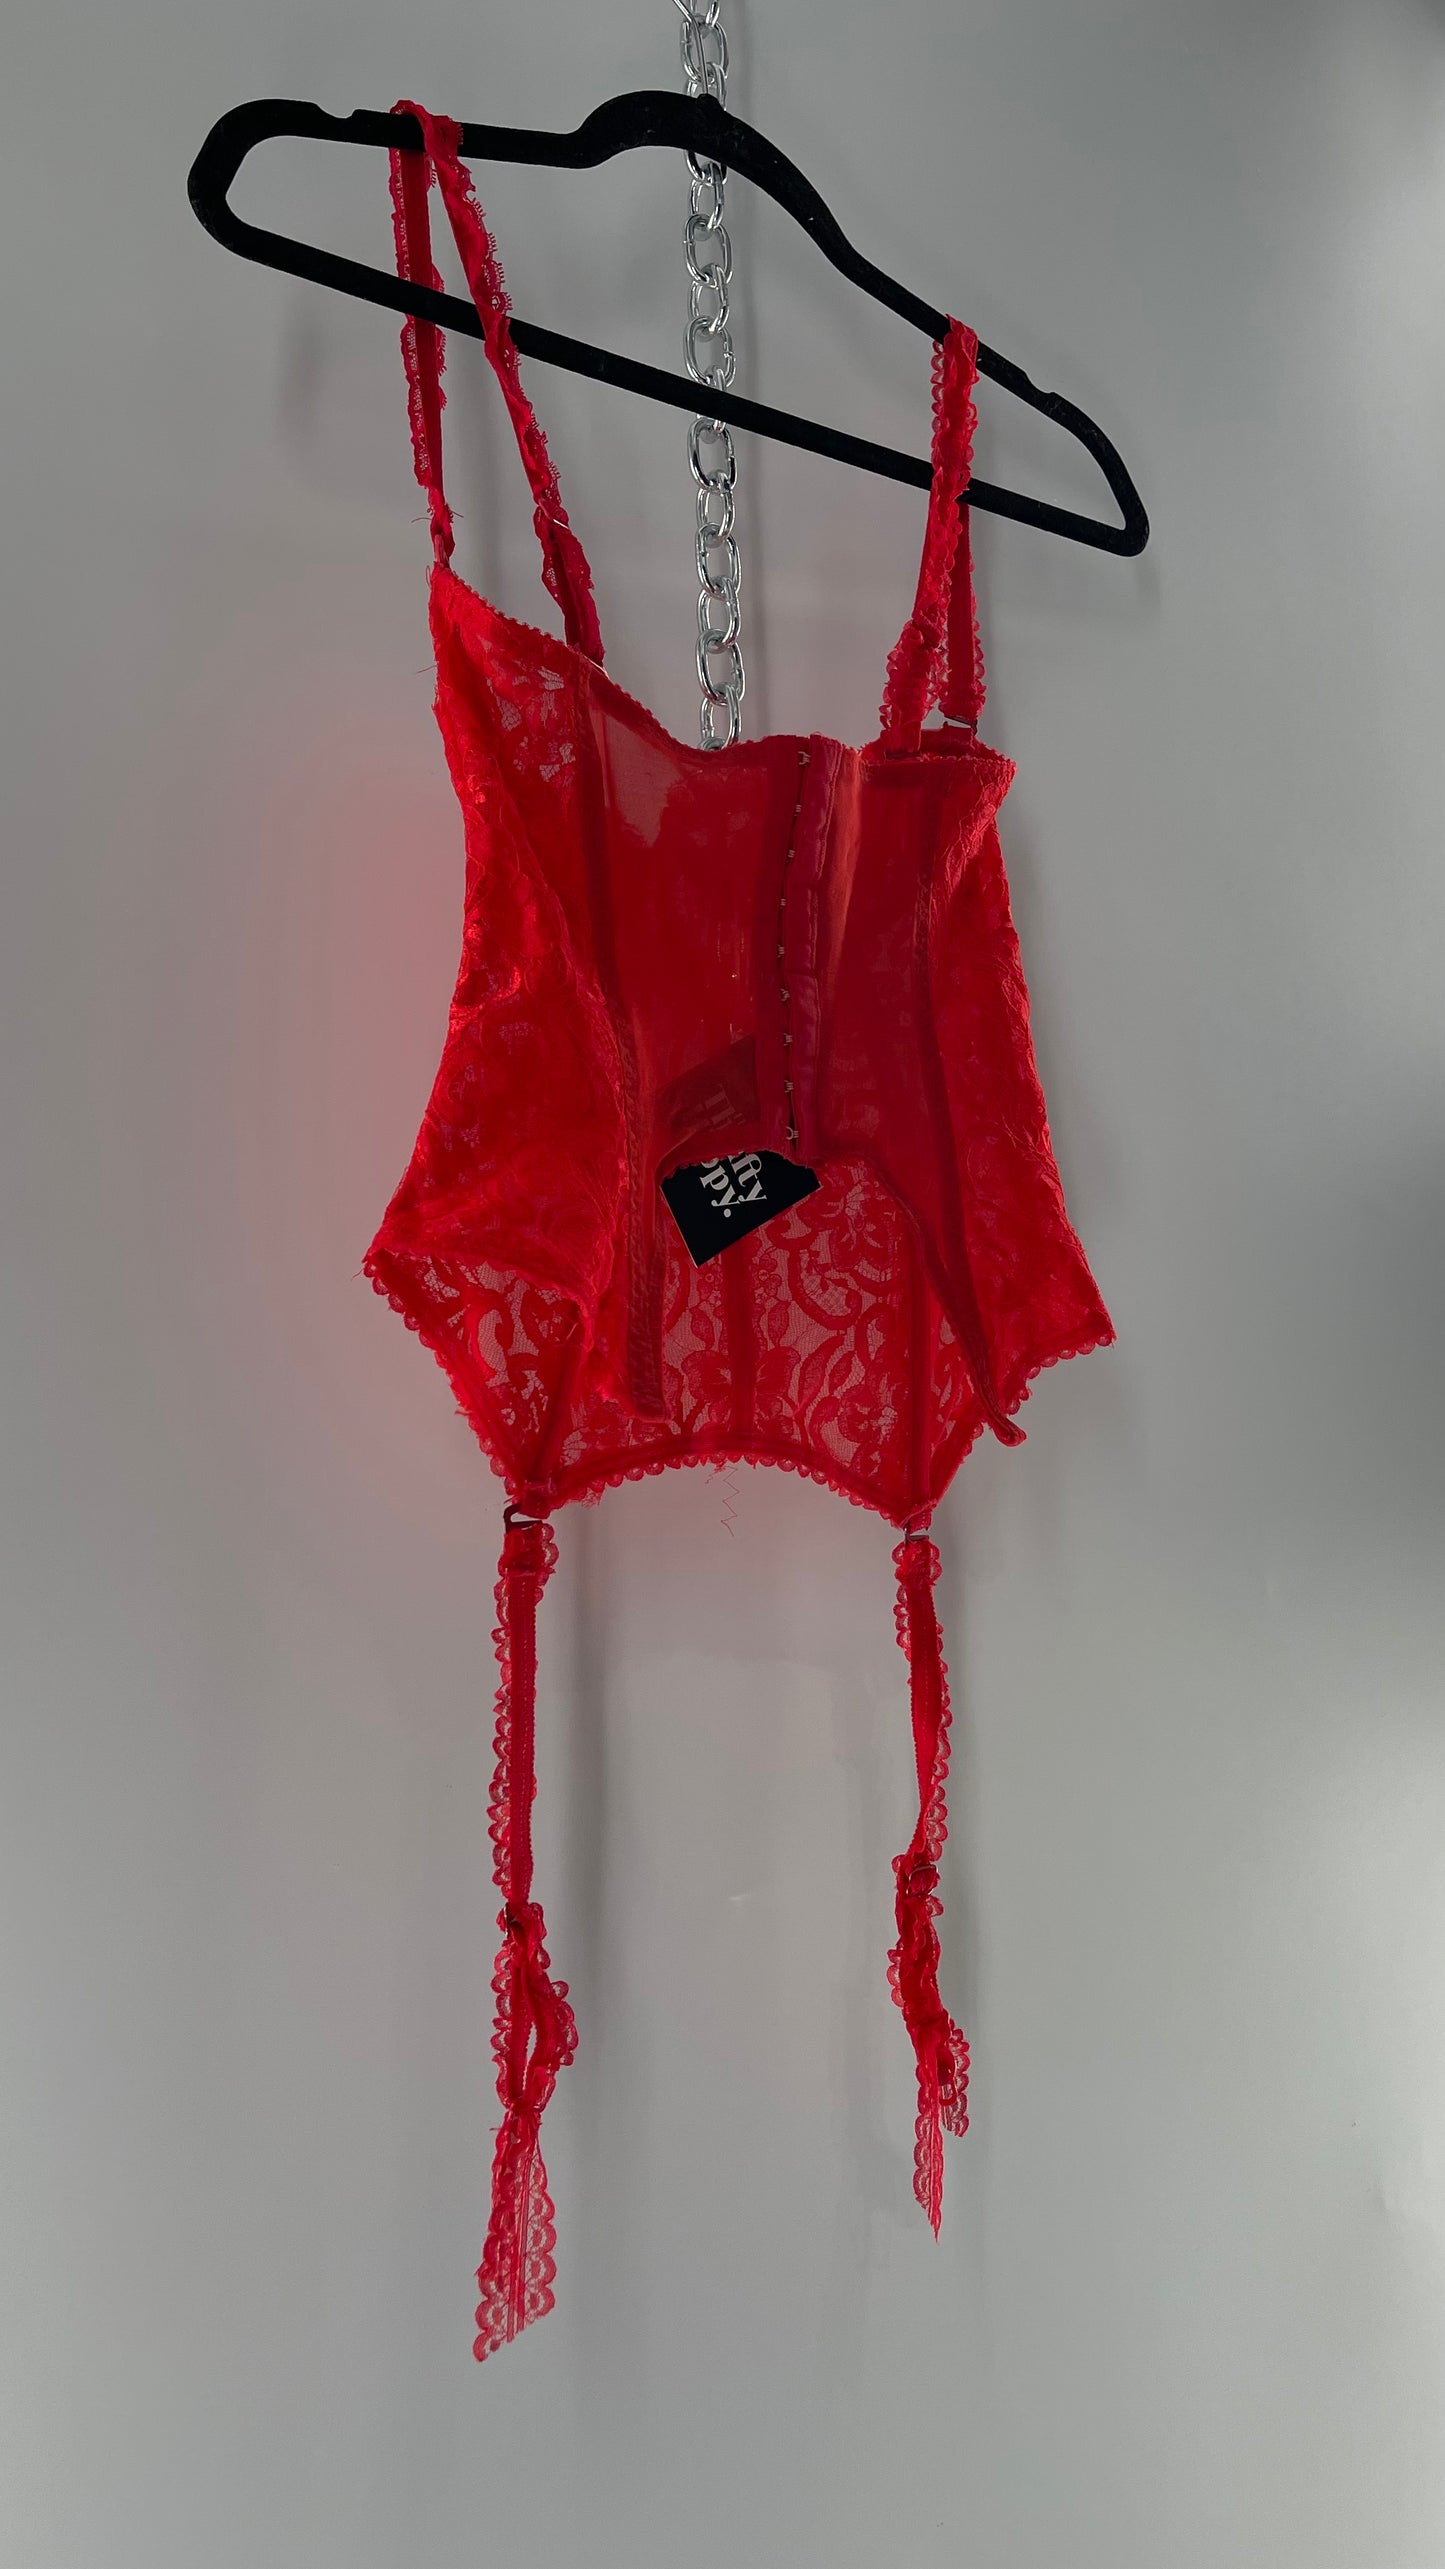 90s Vintage Red Lace Corset with Ruffled Sleeves and Removable Garter Straps (32B)